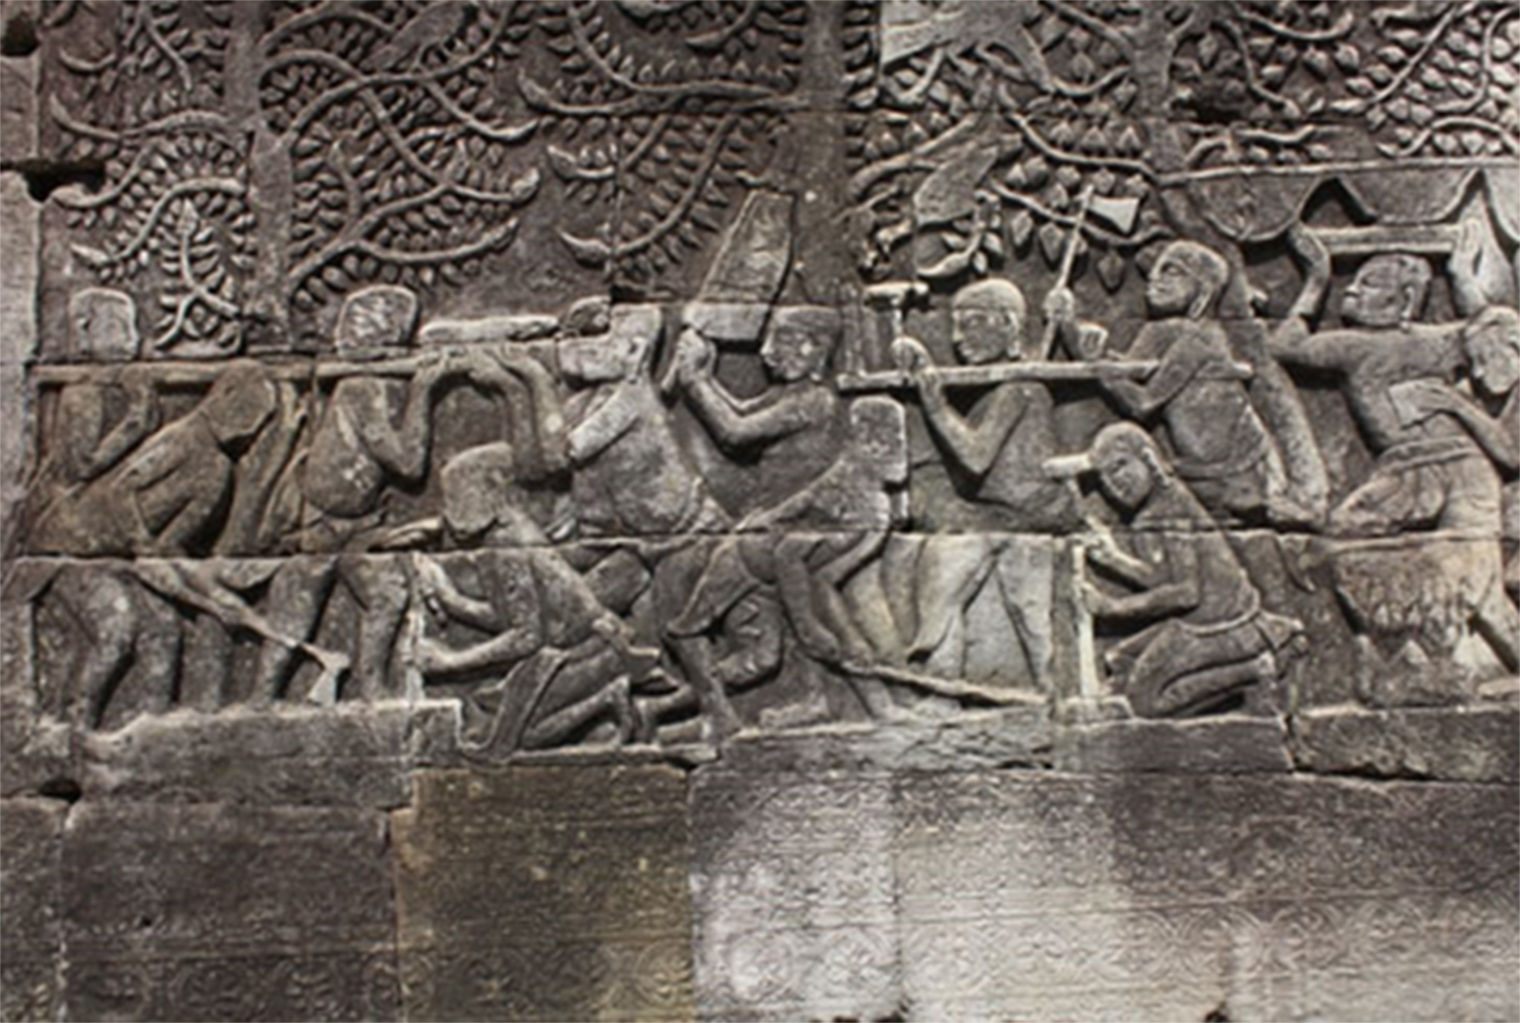 This bas-relief from the south gallery of Bayon temple (ca. twelfth century) might depict Khmers working in a stone quarry (Higham, 2002). Scenes describing the transportation and levering of stone blocks are also carved in other galleries of the same temple.